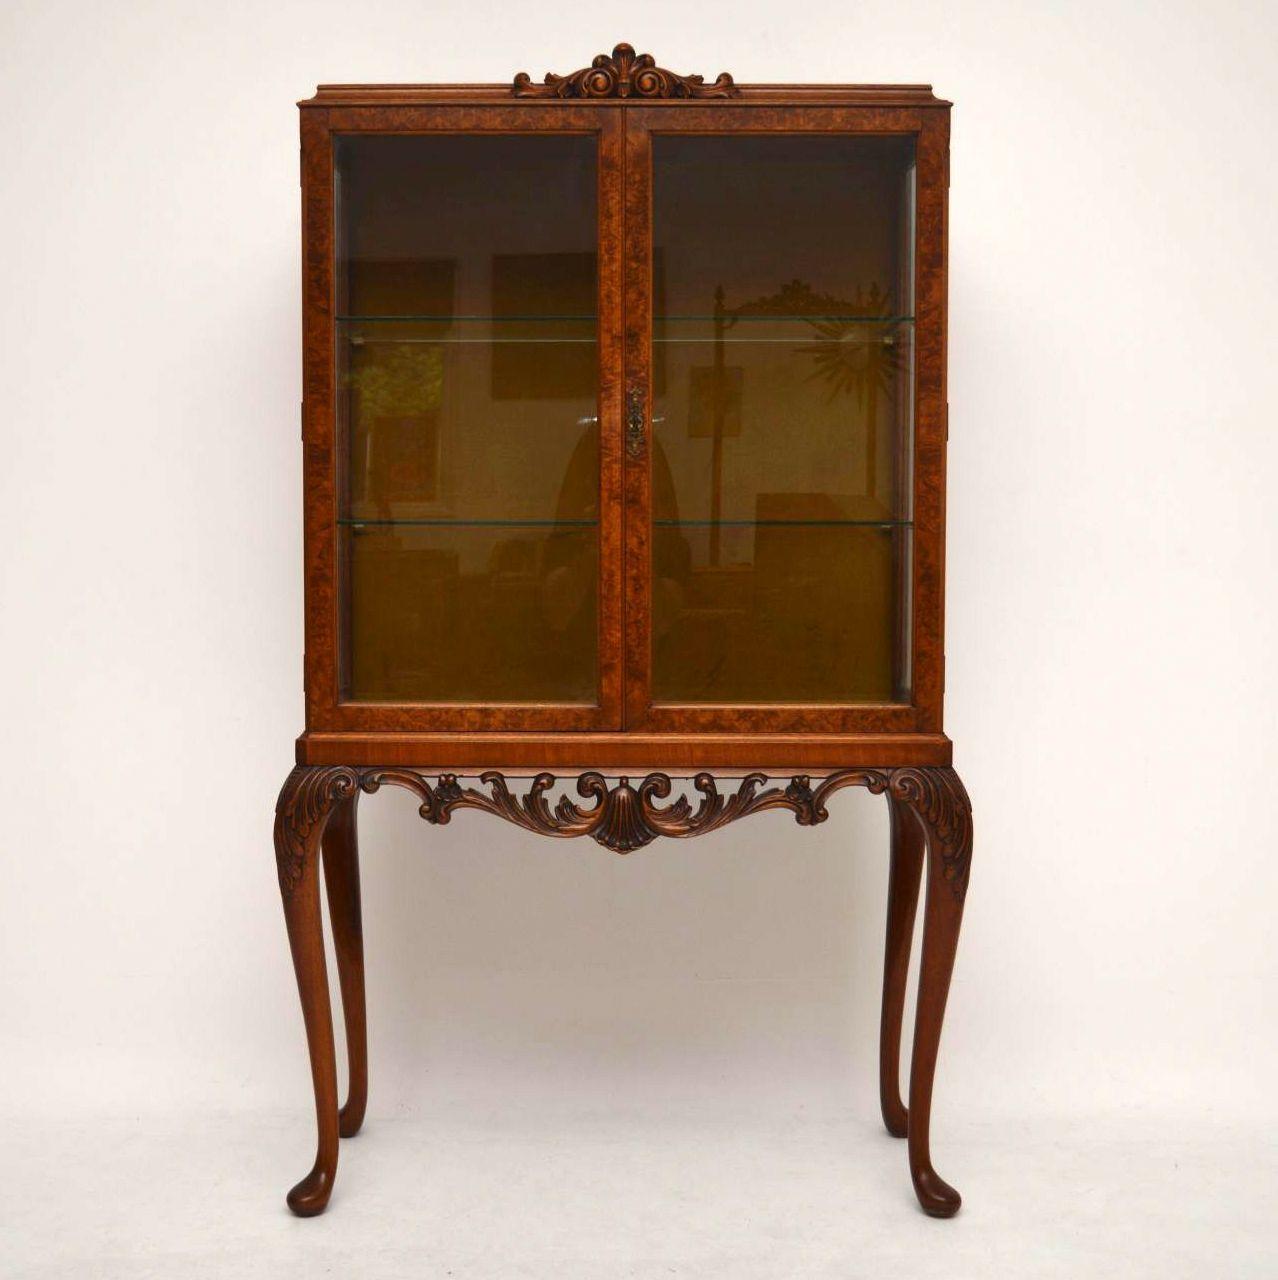 Fine quality antique walnut display cabinet in excellent condition, dating to circa 1920s period. The top section has two burr walnut glazed doors with two glass shelves inside & fabric on the back. It sits on well carved solid walnut legs with more